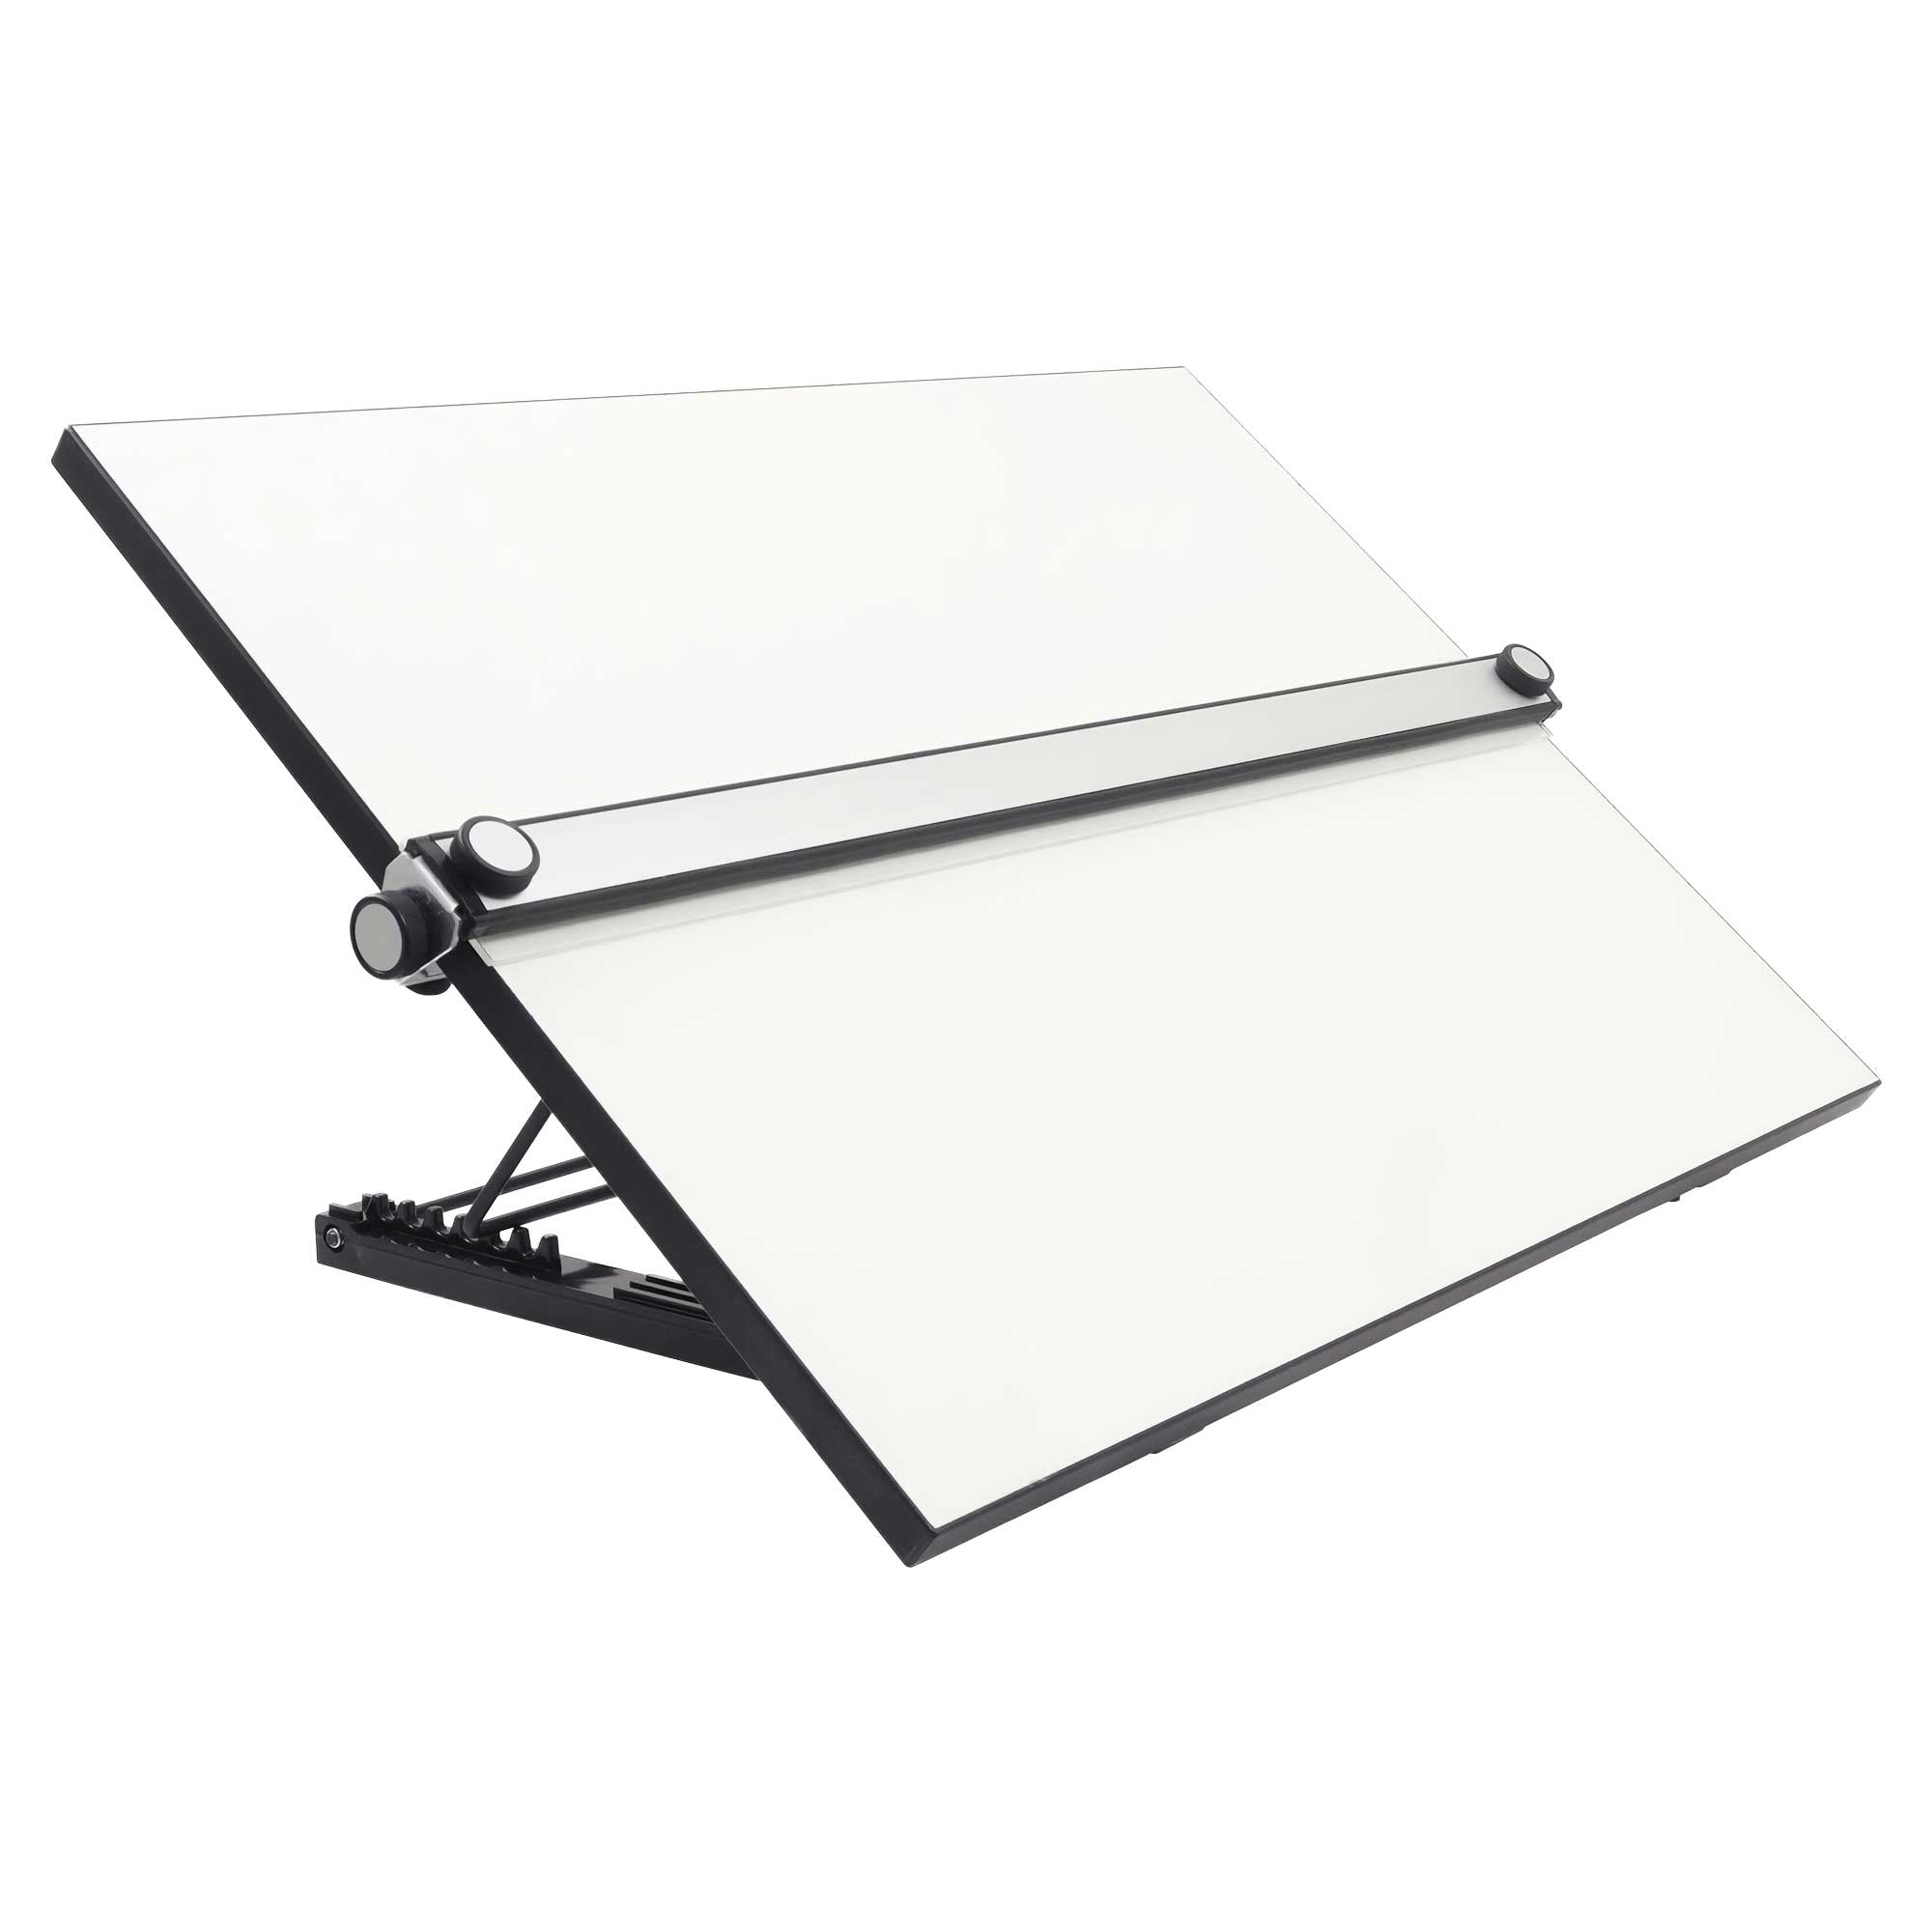 Staedtler Parallel Straight Edge Drawing Board 18 x 24 White